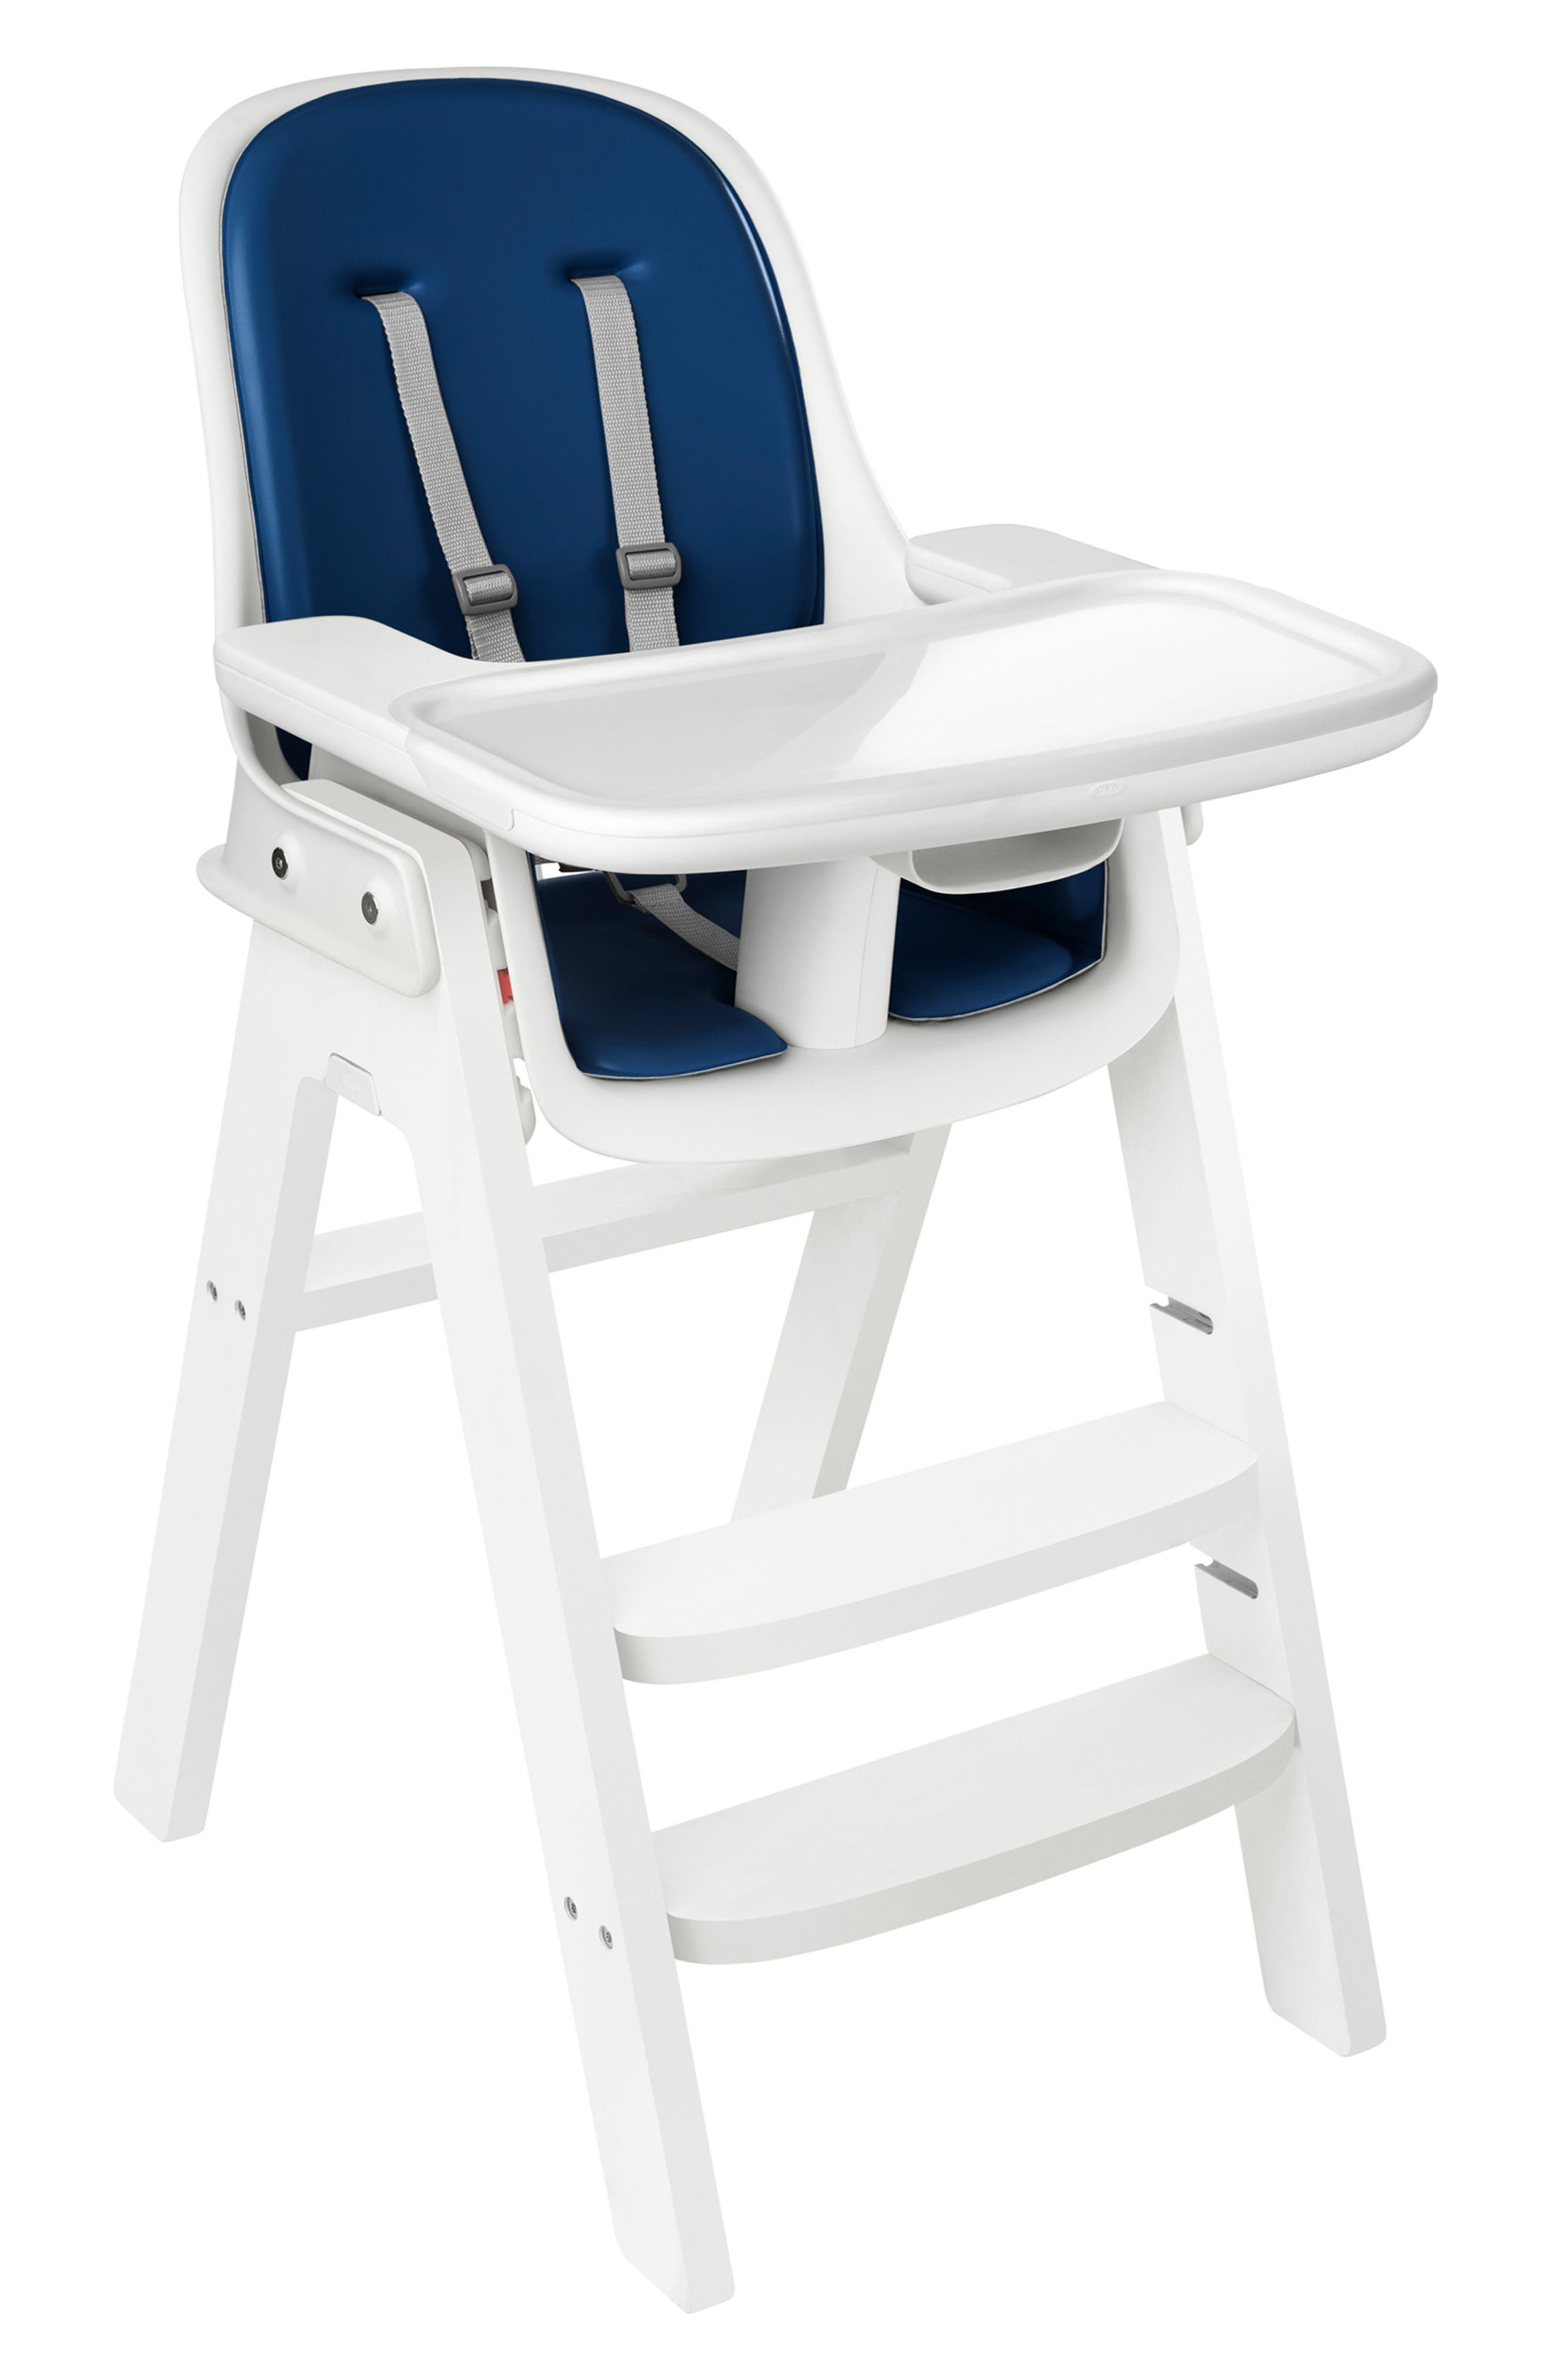 10 Of The Best High Chairs And Booster Seats For Babies And